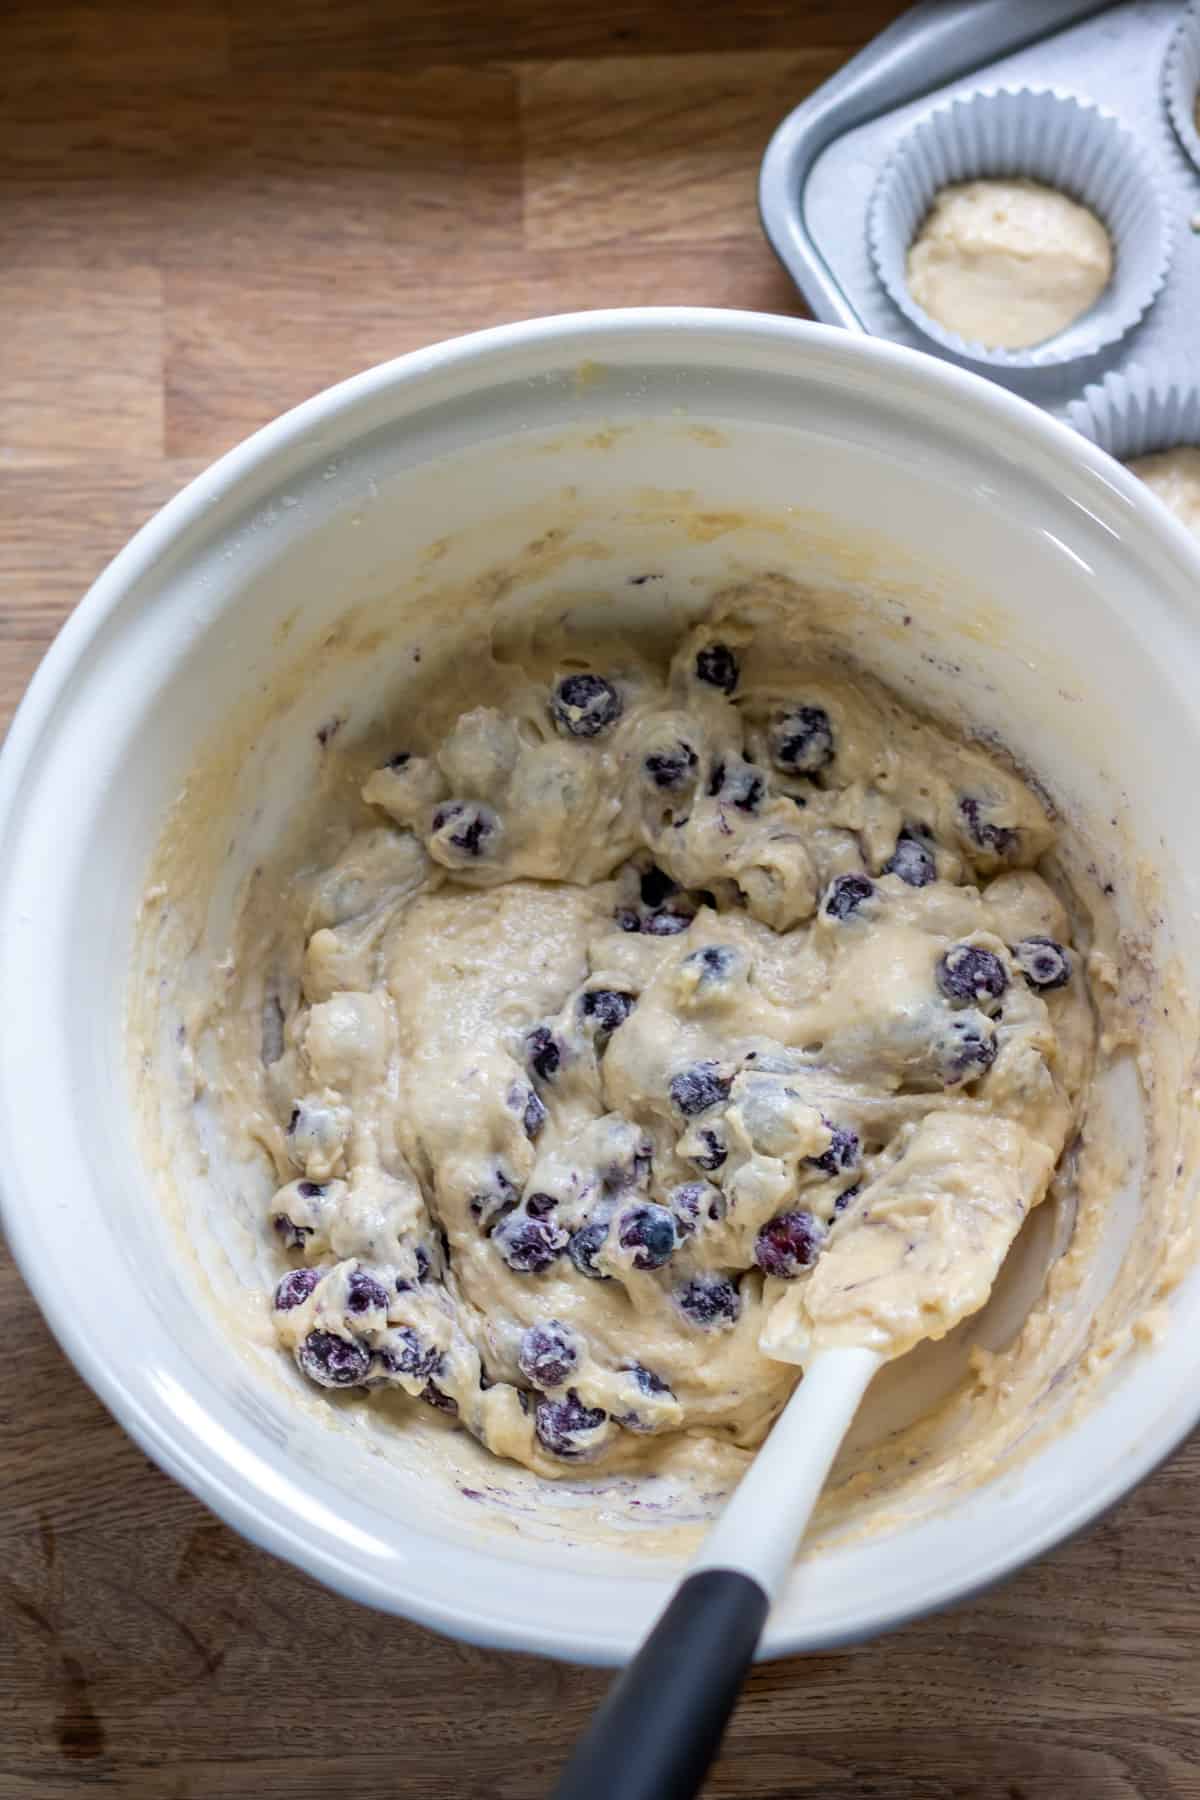 Mixing the blueberries into the batter.